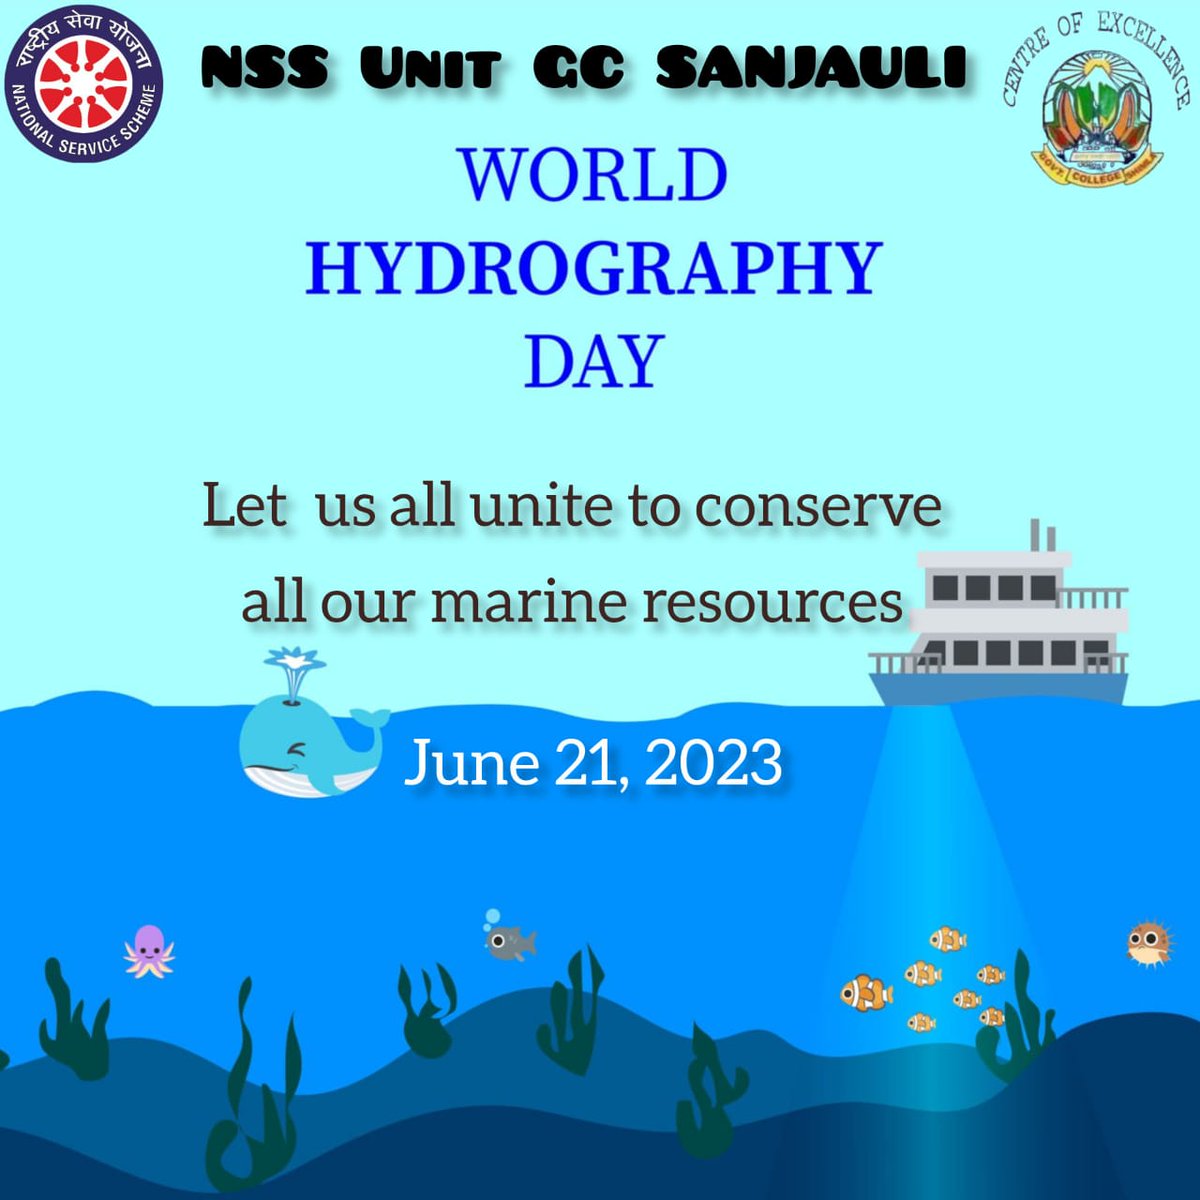 NSS UNIT GC SANJAULI wishes you all wishes you all World Hydrography Day. @_NSSIndia @ConnectingNss @ianuragthakur @NSSChennai @NSSRDChandigarh @NssrdD @NssunitDbc @PMOIndia @_NSSAwards @YASMinistry